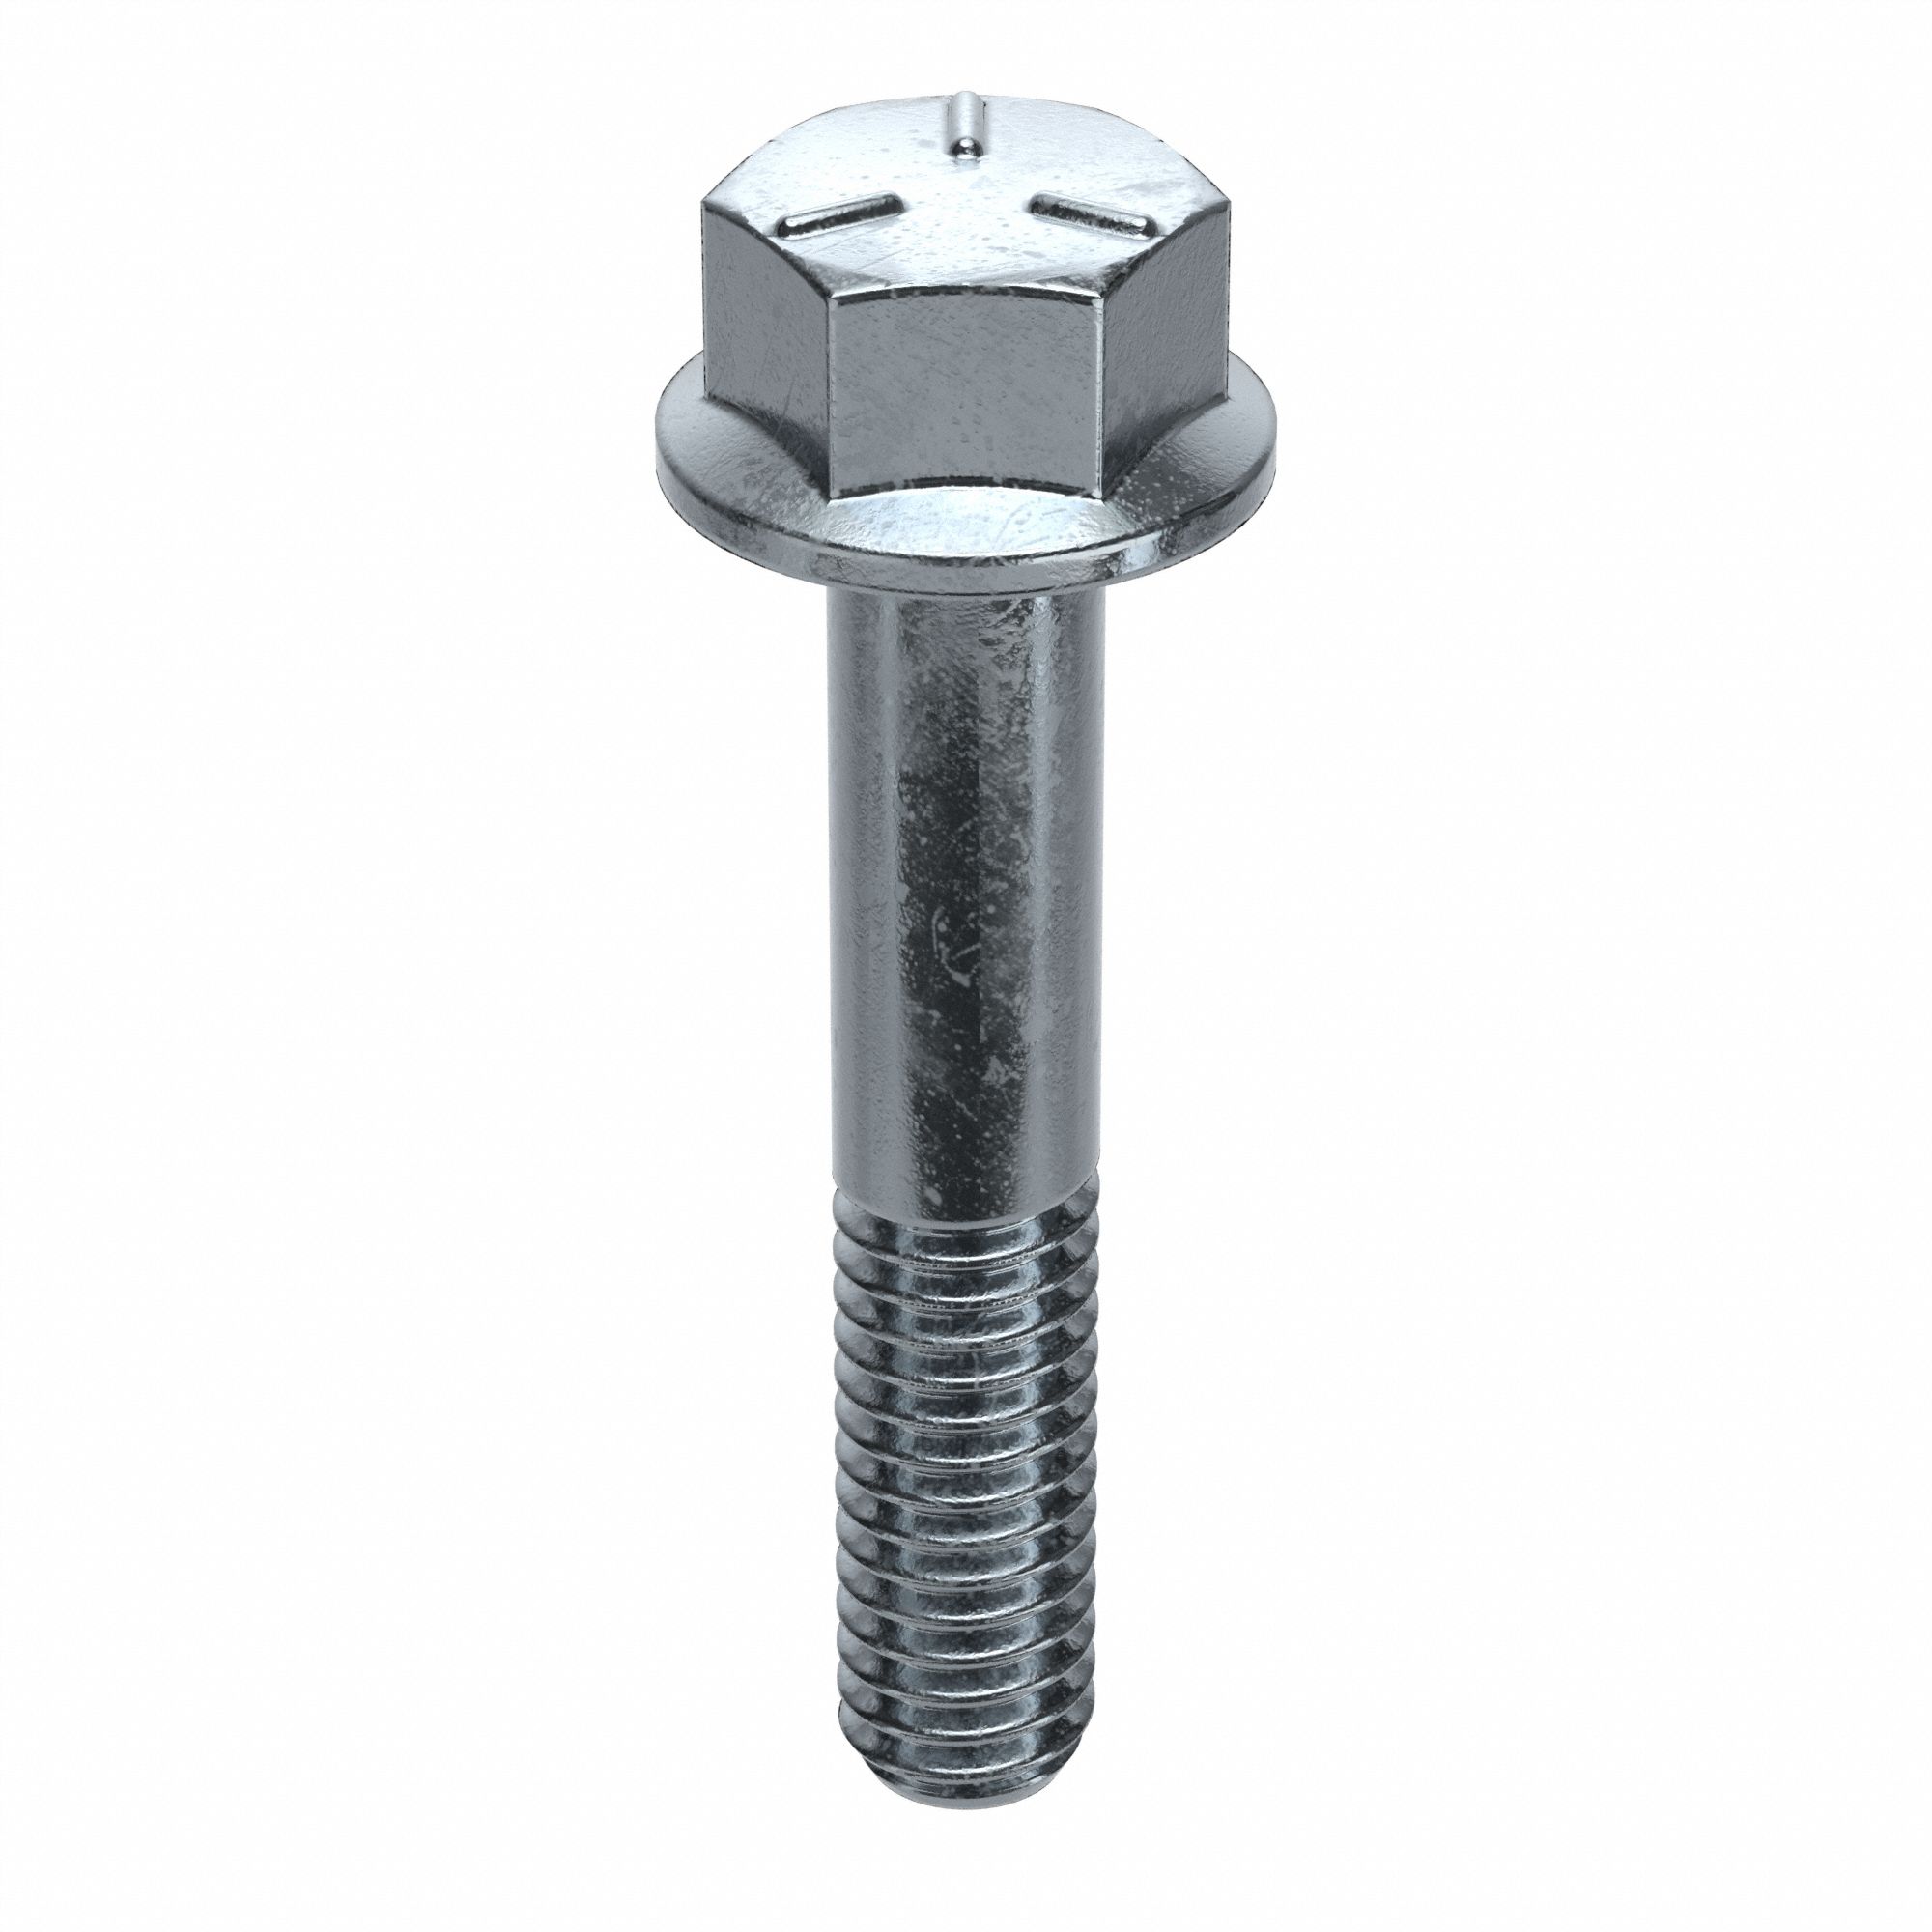 Flange Bolts: Std, Steel, Grade 5, Zinc Plated, 2 in lg, Partially  Threaded, Inch, 2A, Hex, 50 PK